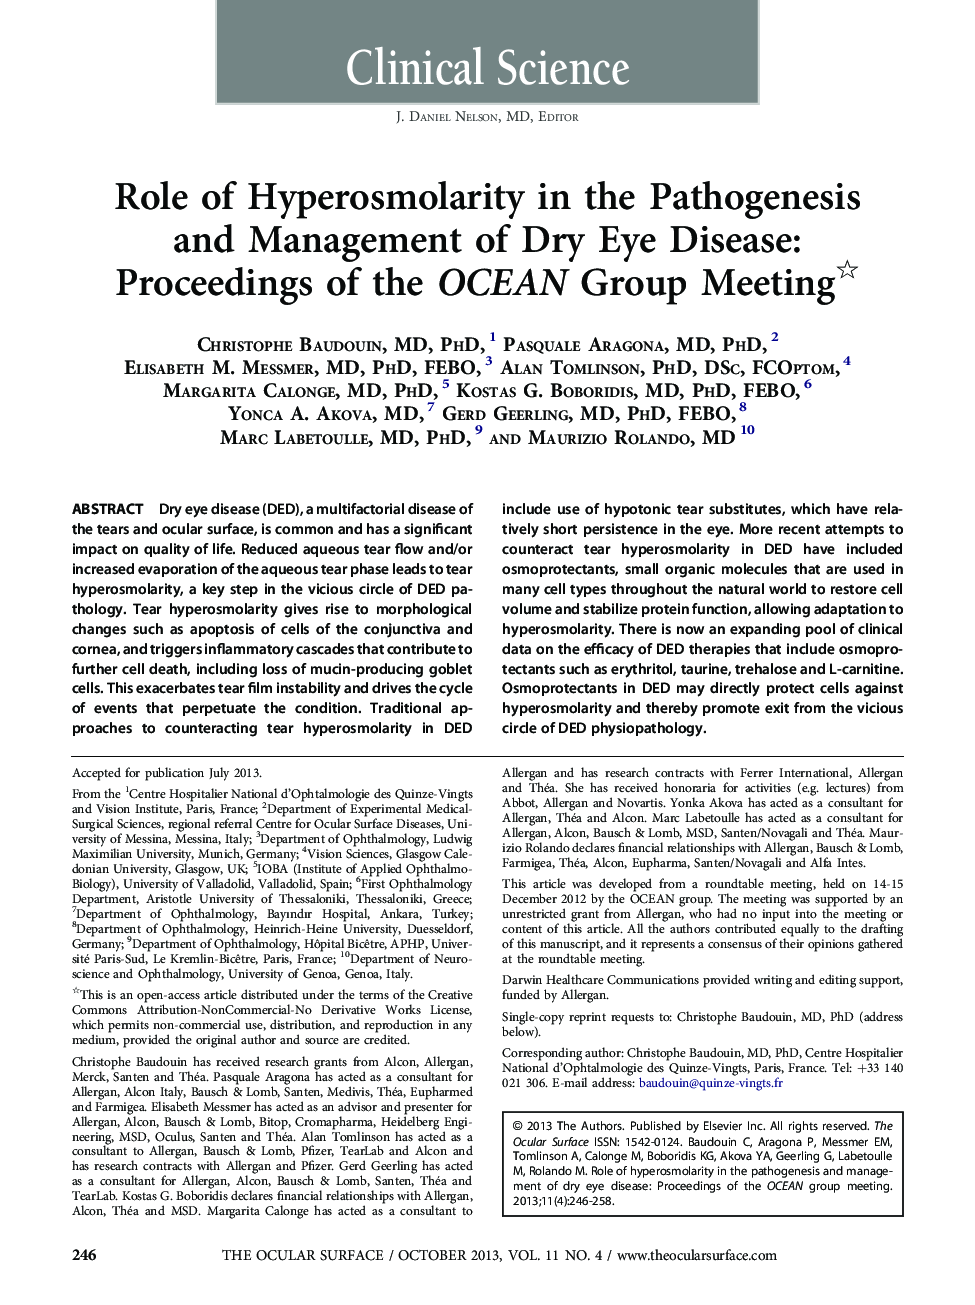 Role of Hyperosmolarity in the Pathogenesis and Management of Dry Eye Disease: Proceedings of the OCEAN Group Meeting